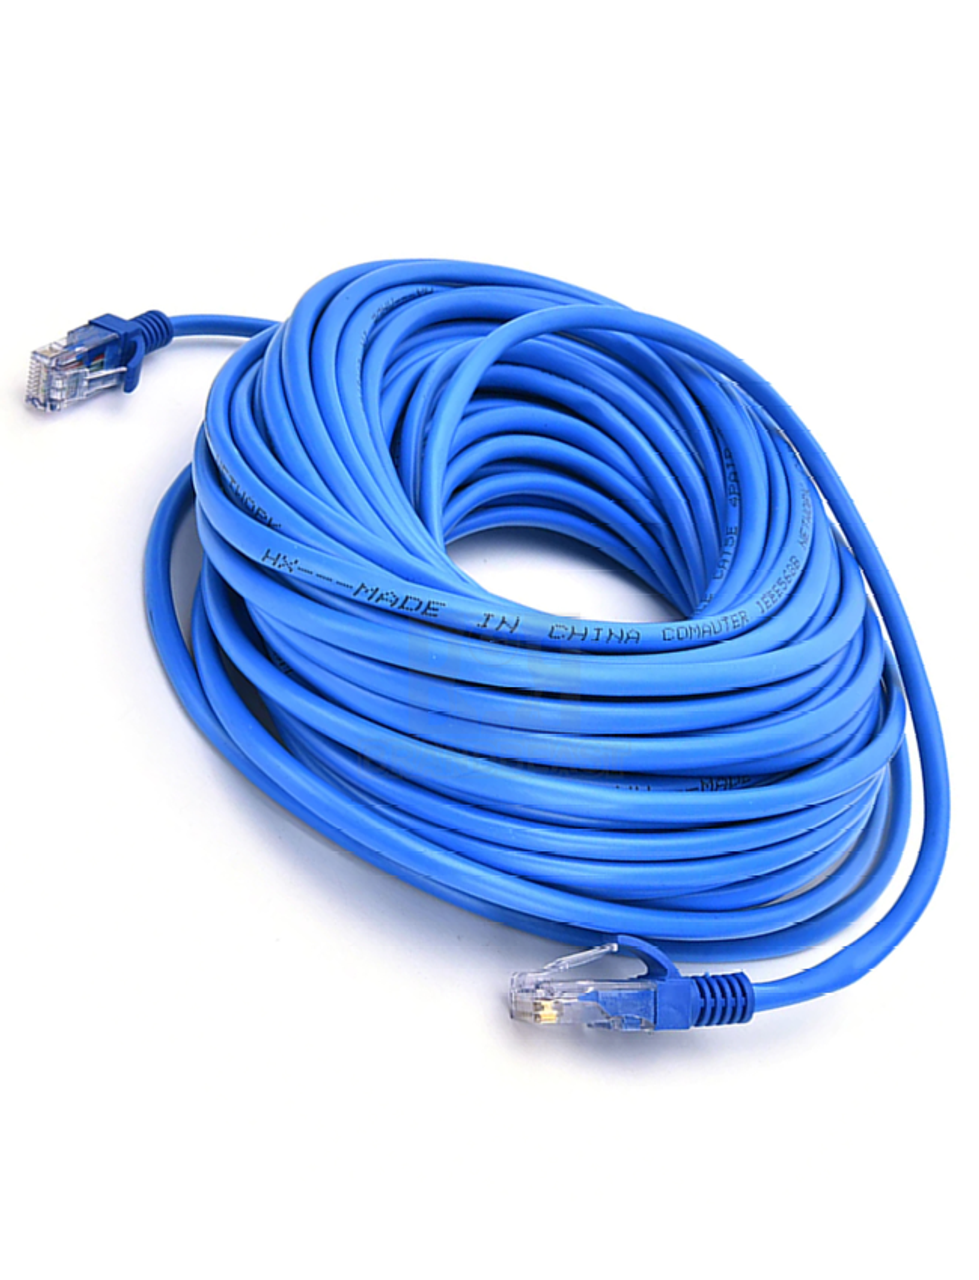 Victron Energy RJ45 UTP Cable 20m